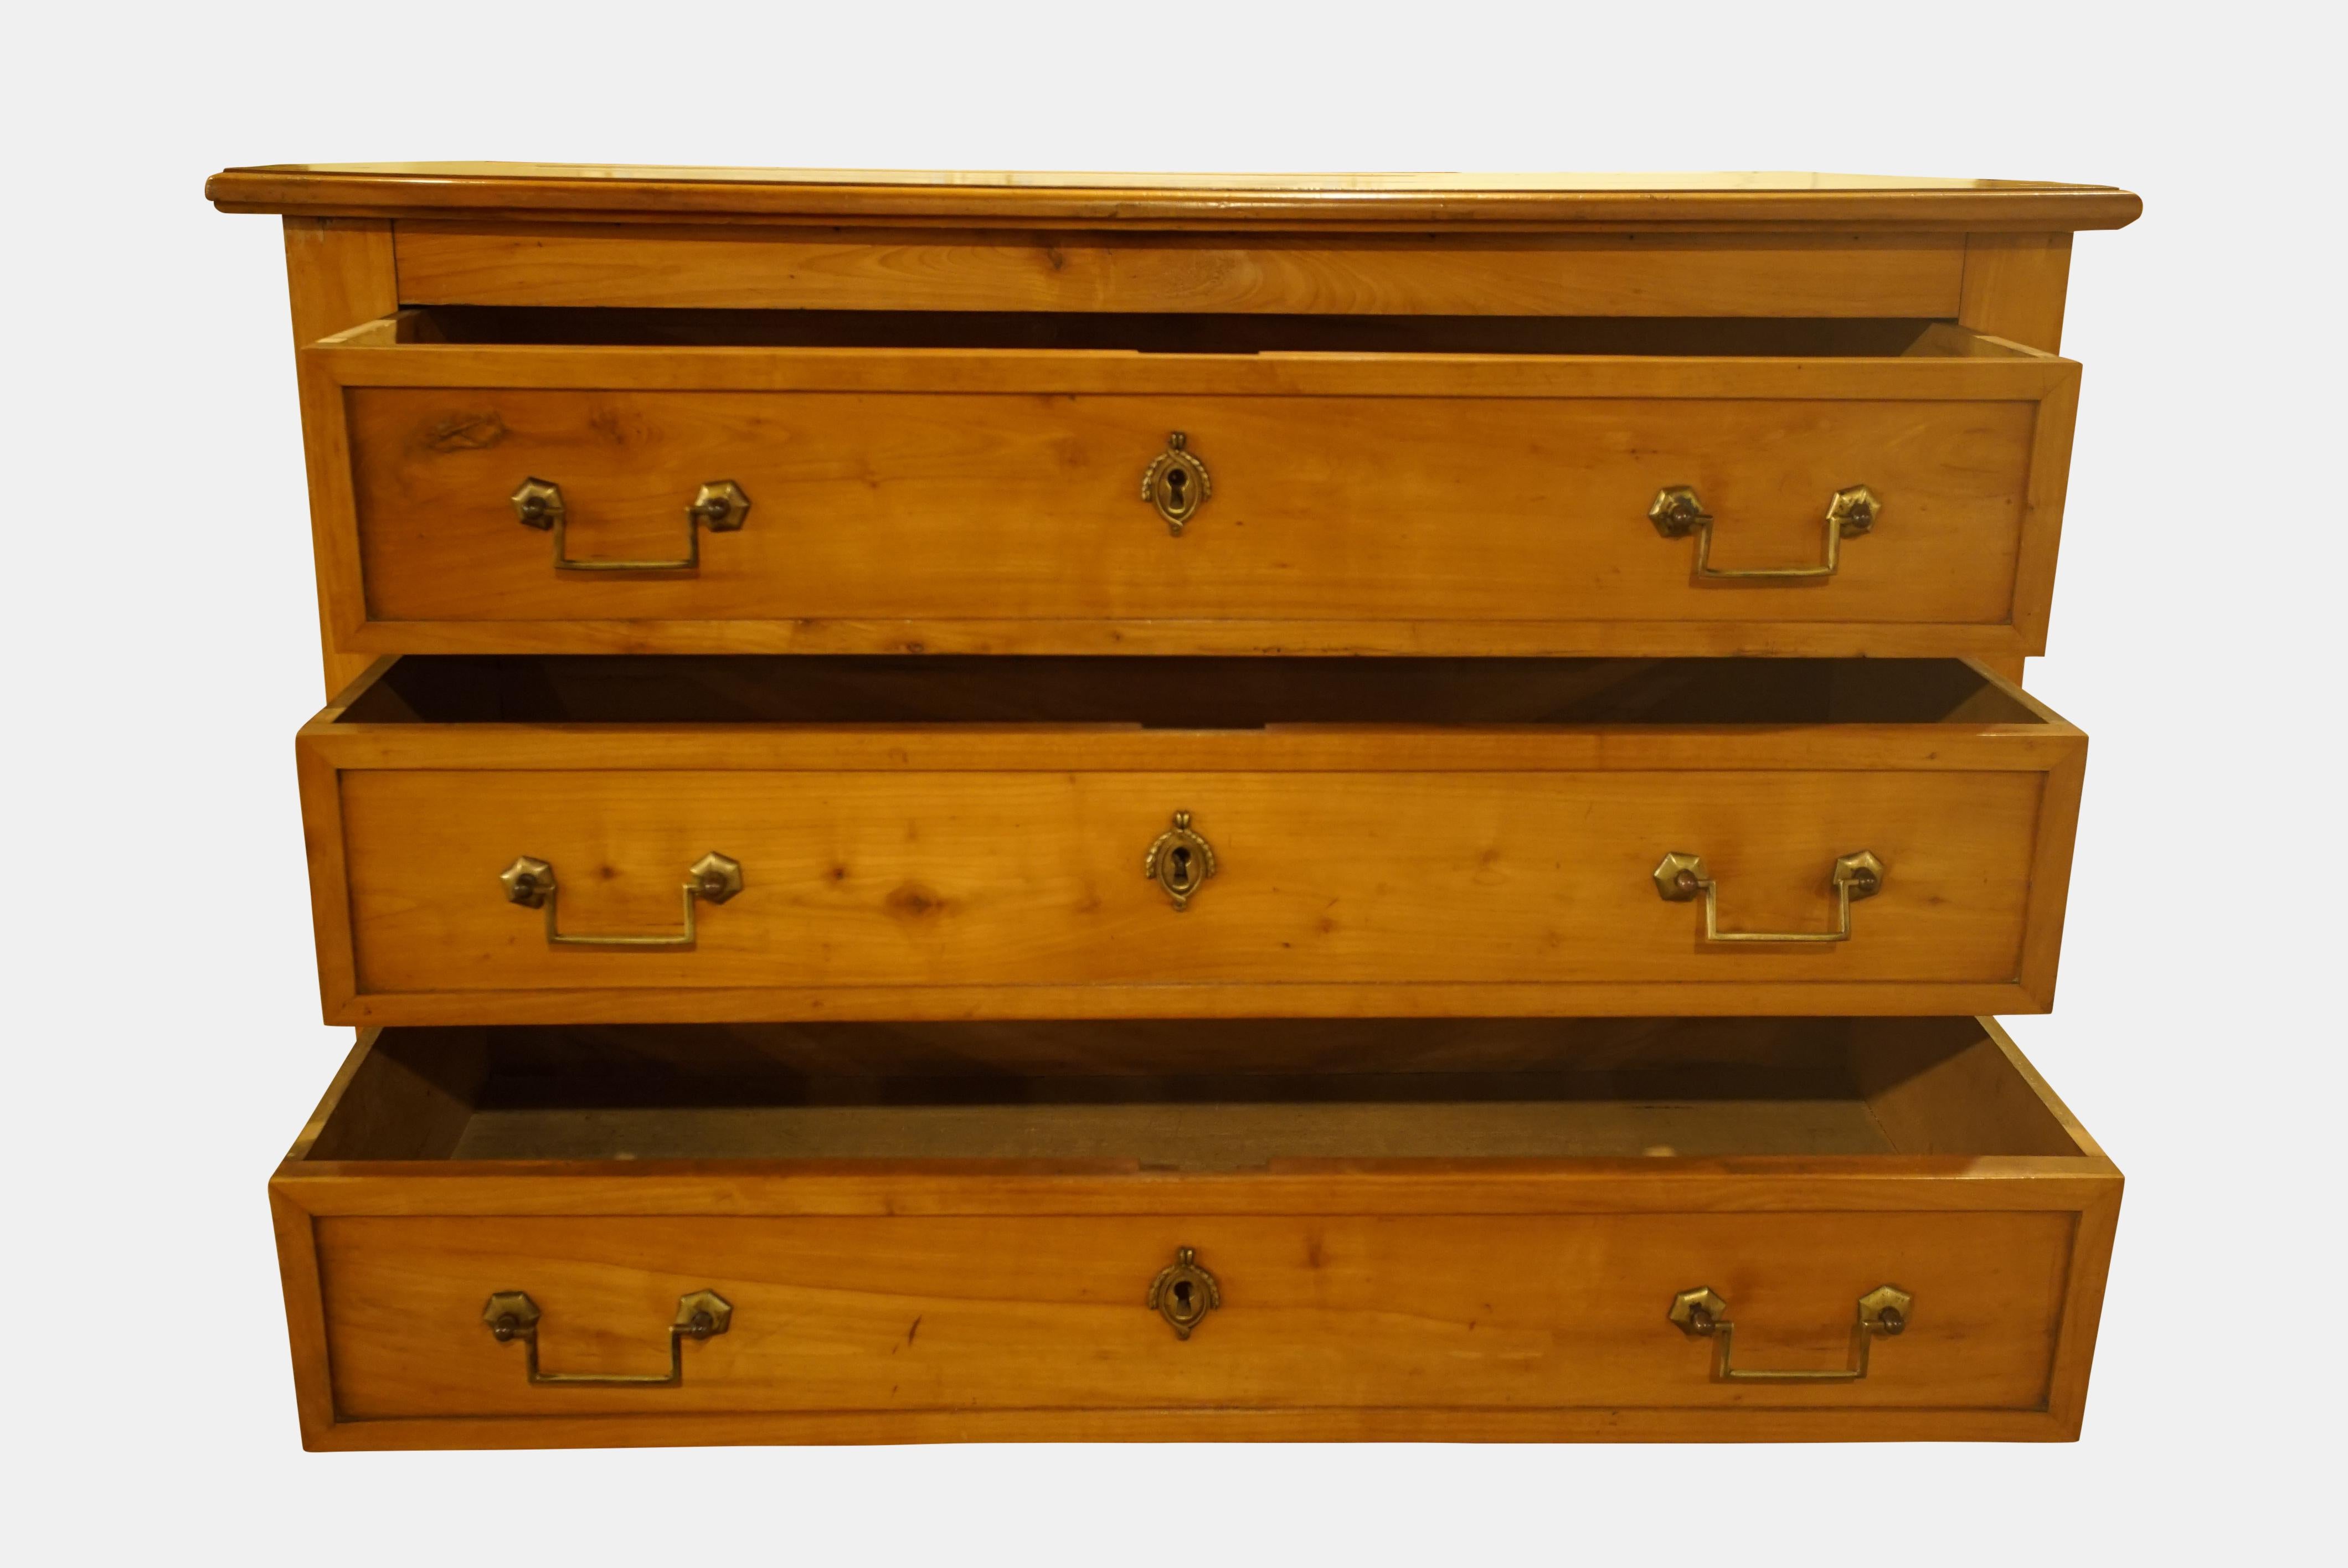 An unusual 19th century French cherry wood chest of drawers with brass handles and set on brass feet.